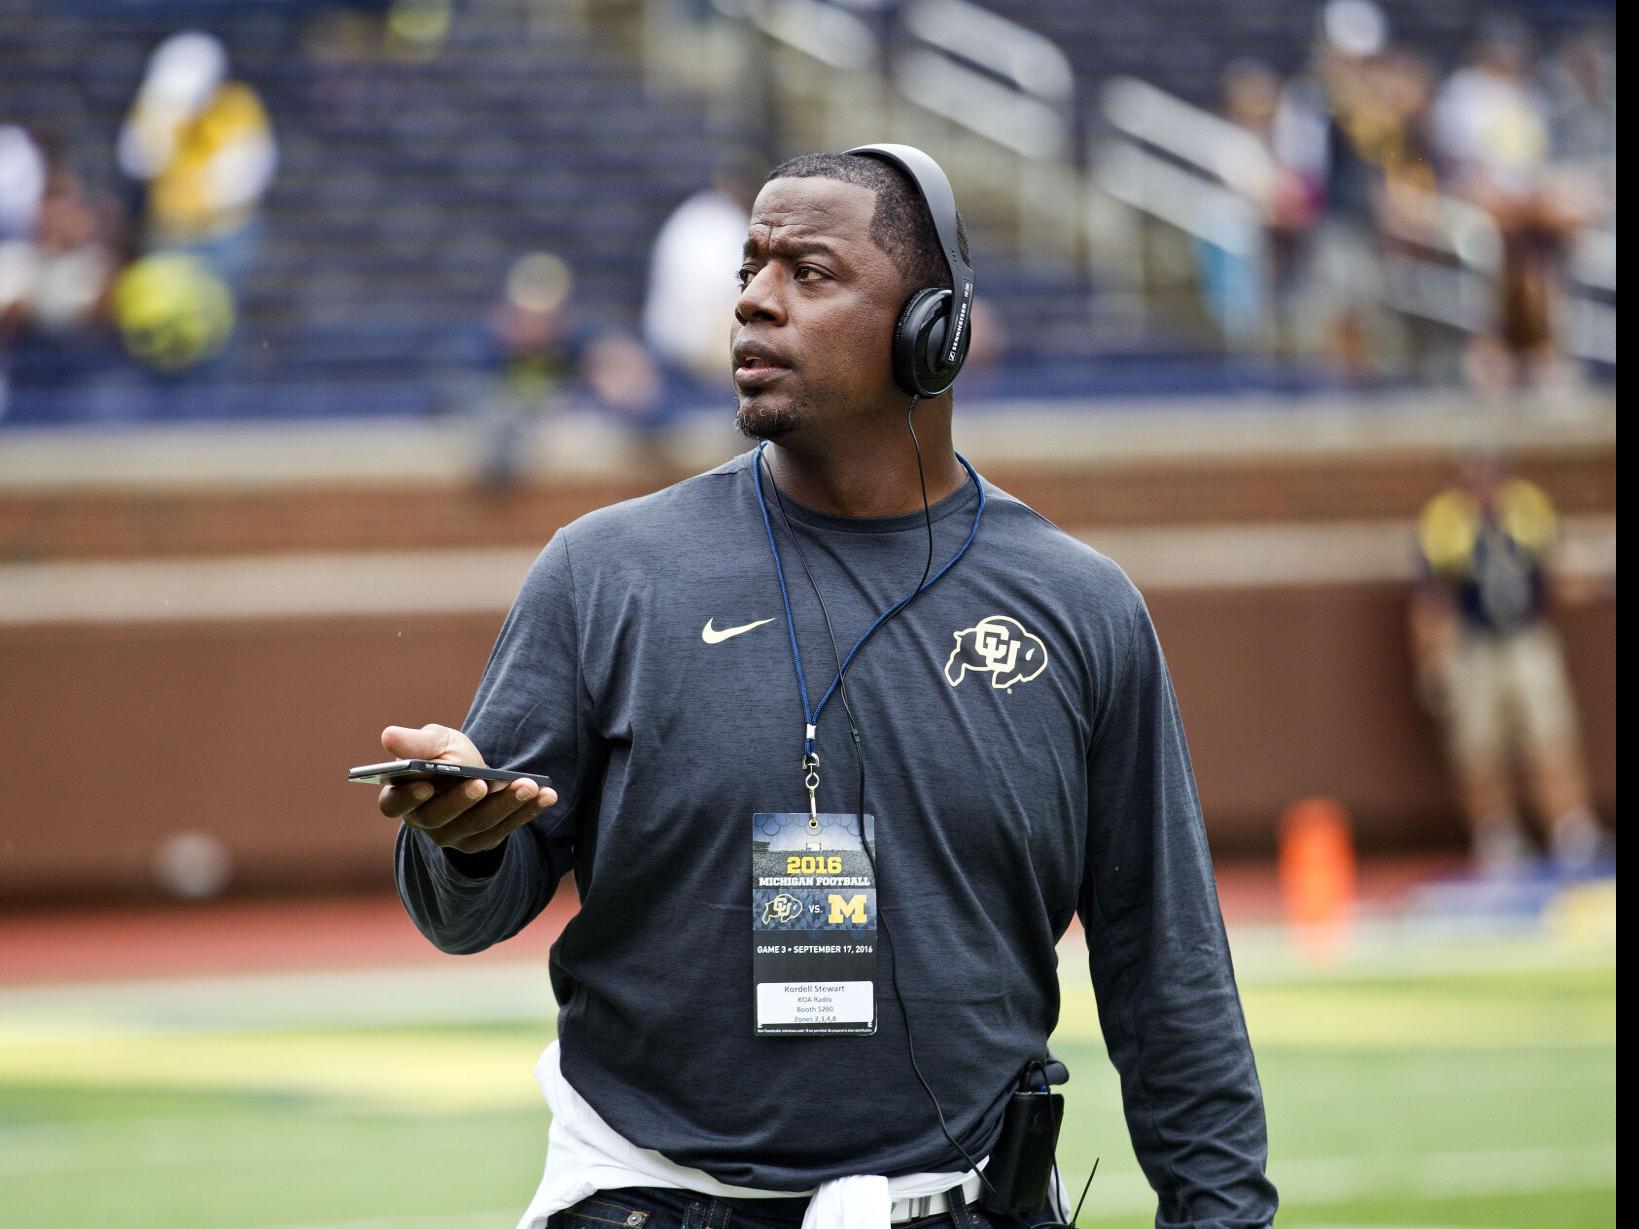 CU Buffs Hall of Famer Kordell Stewart expects instant success